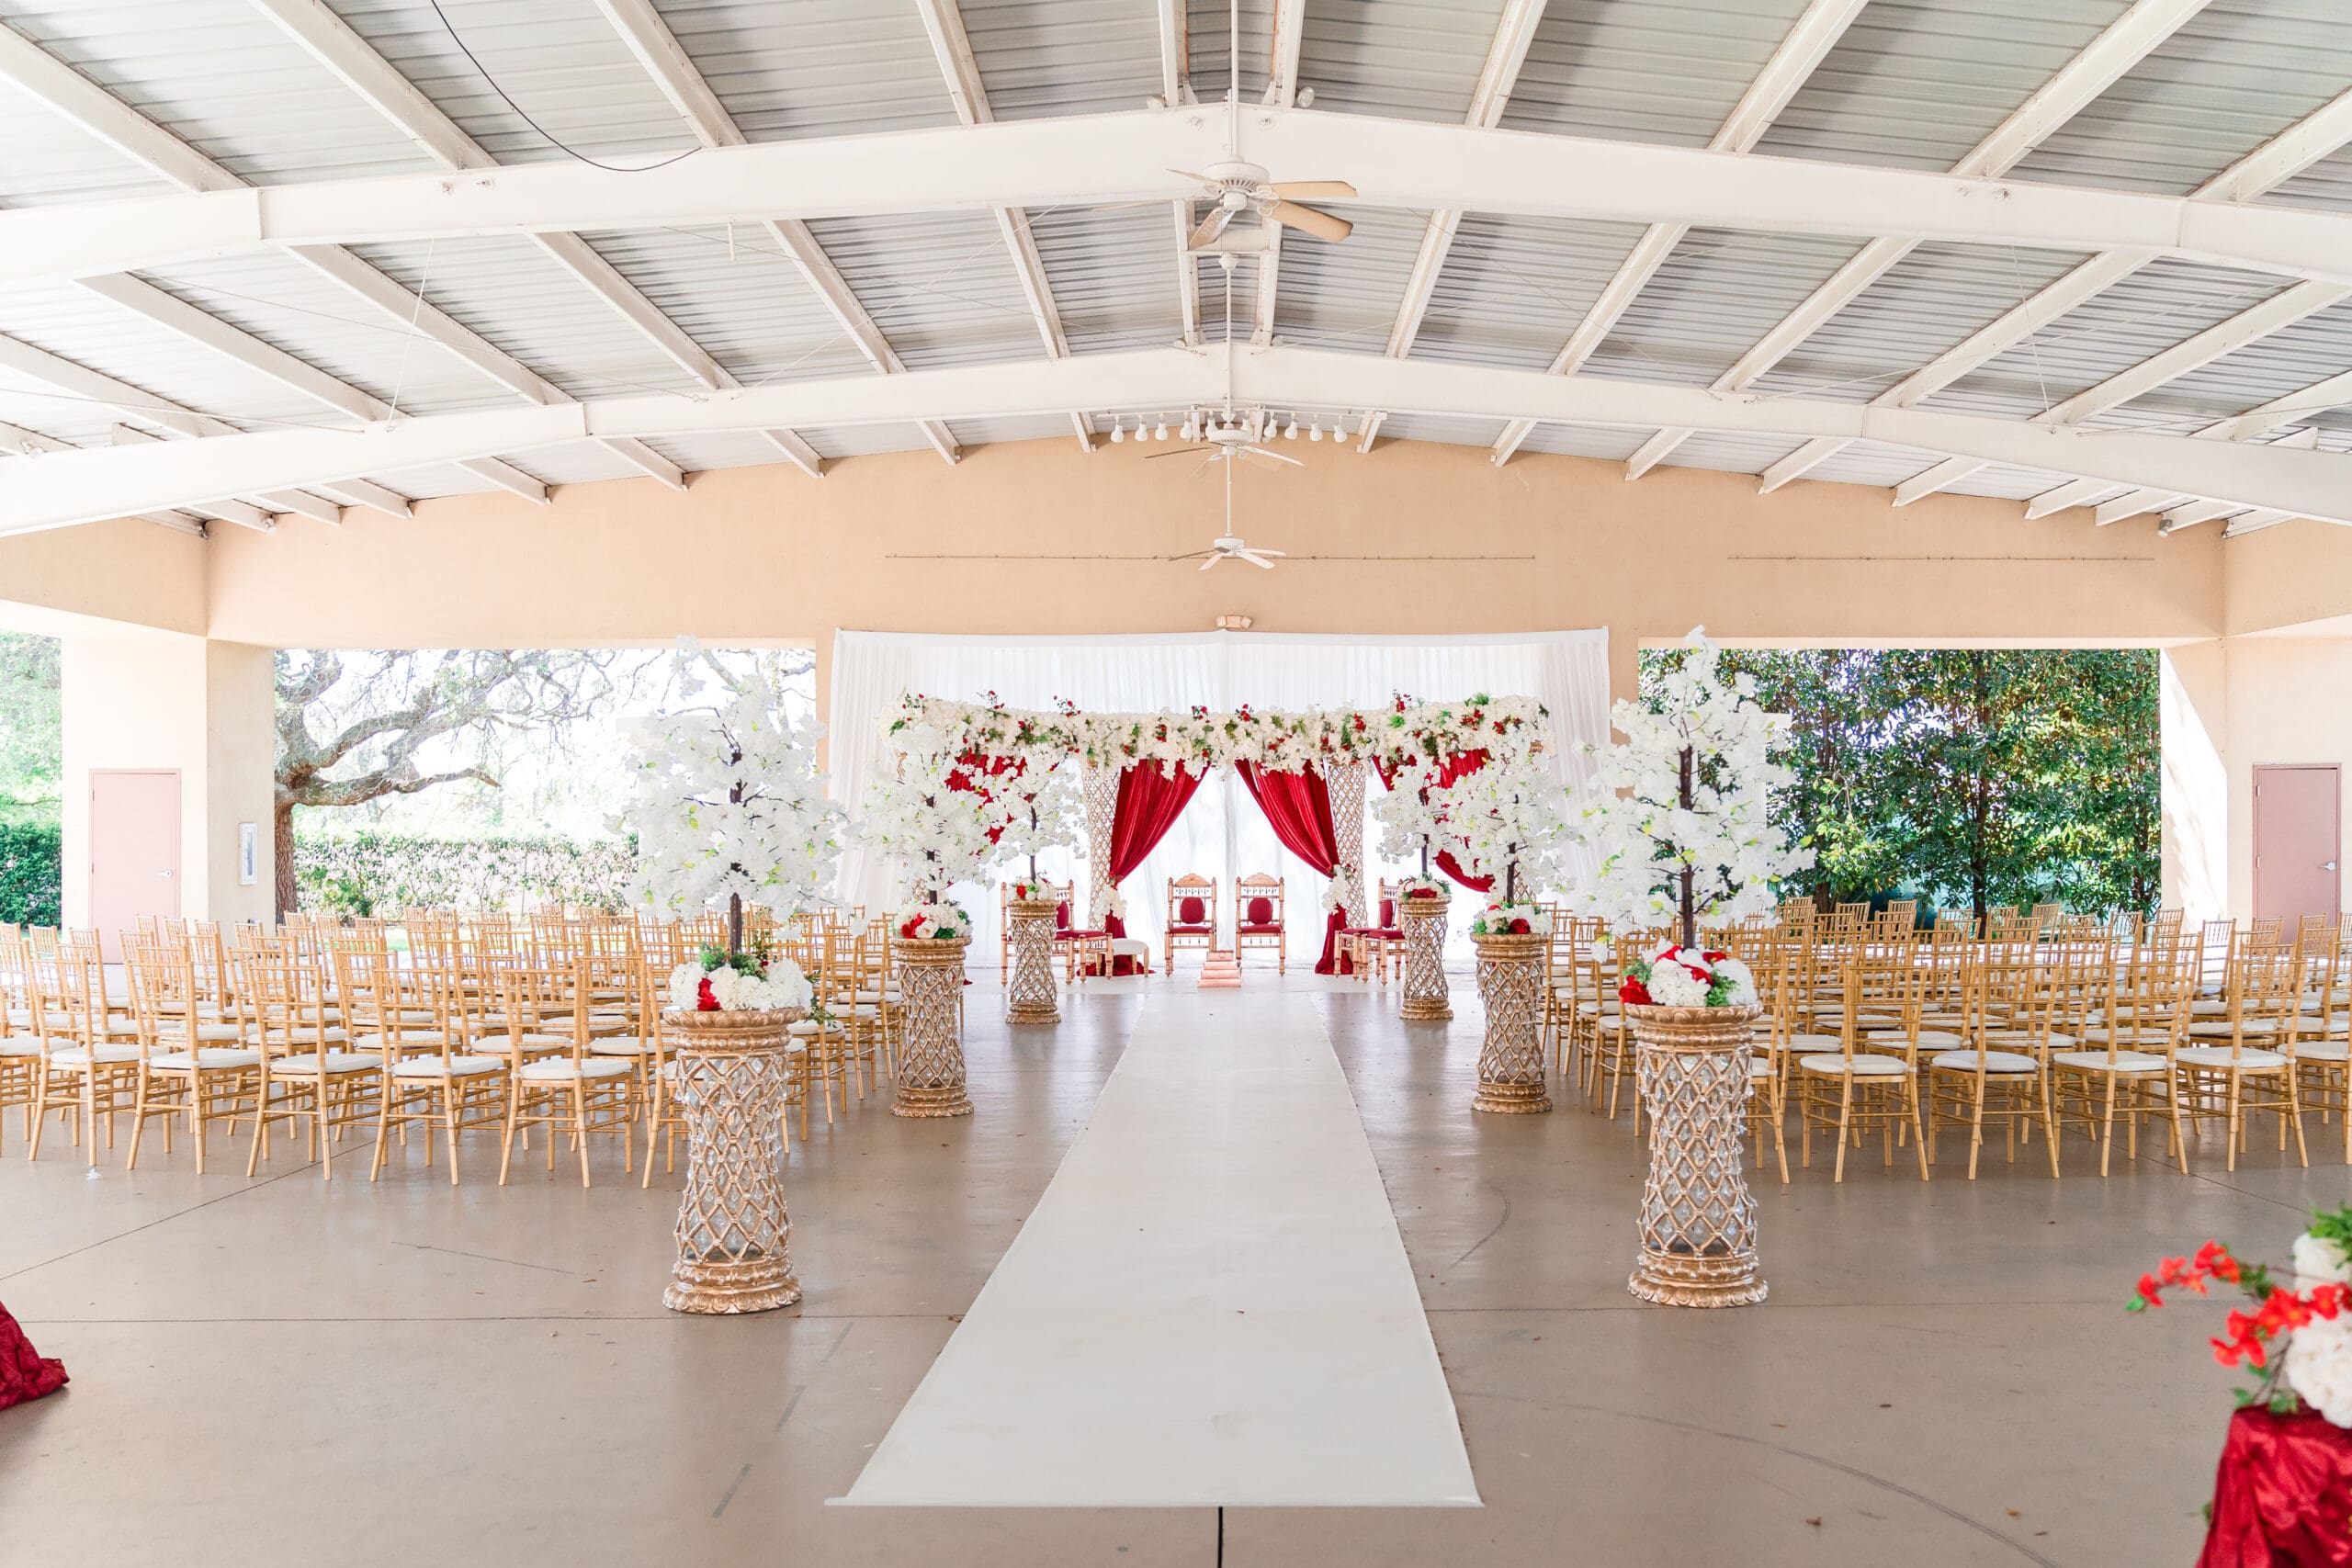 Ceremony area and altar adorned with red drapes and white flowers at Kraft Azalea Gardens